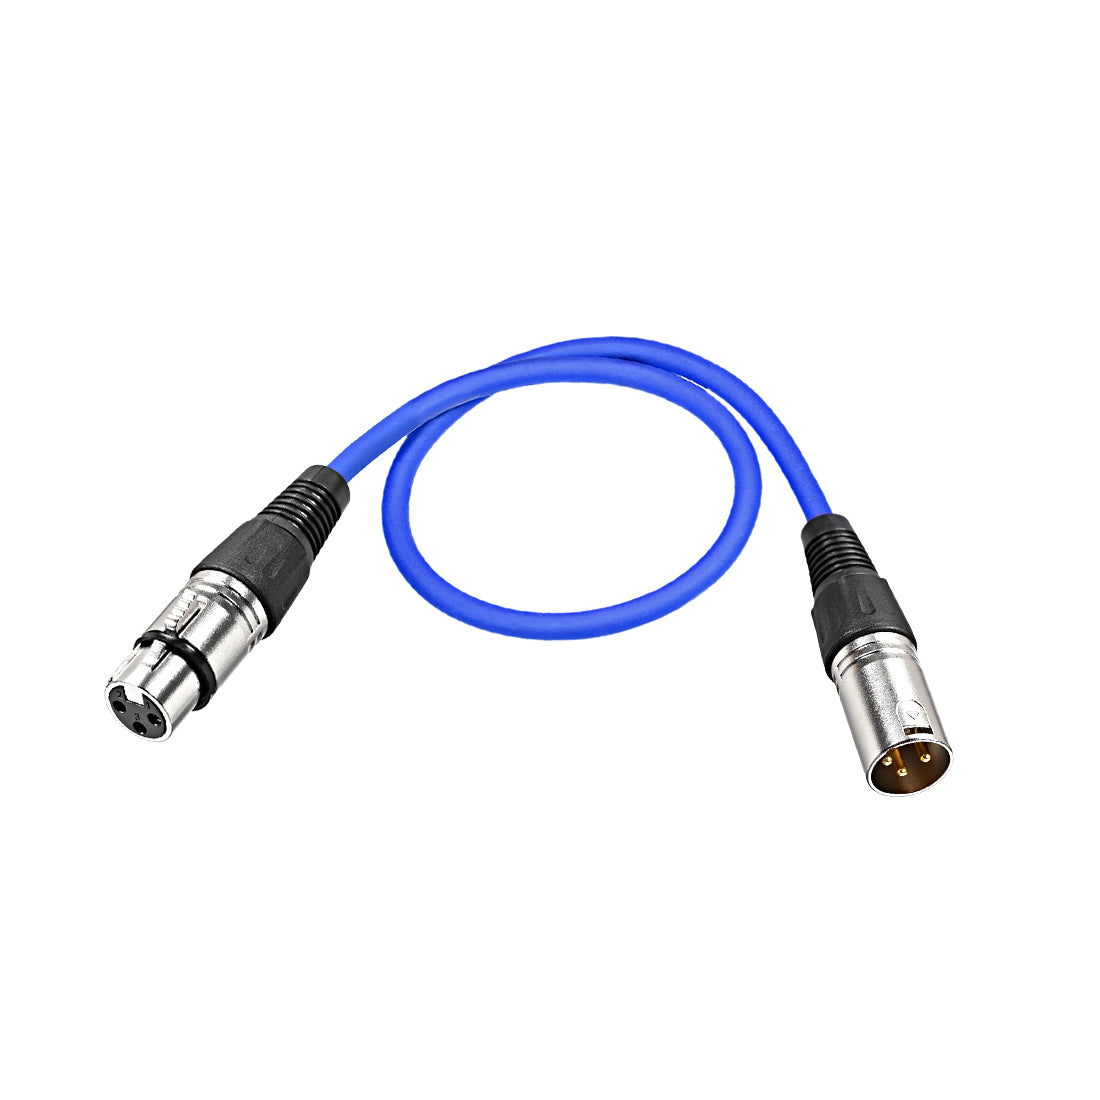 uxcell Uxcell XLR Male to XLR Female Cable Line for Microphone Video Sound Card Mixer Silver Tone XLR Blue Line 0.5M 1.64ft